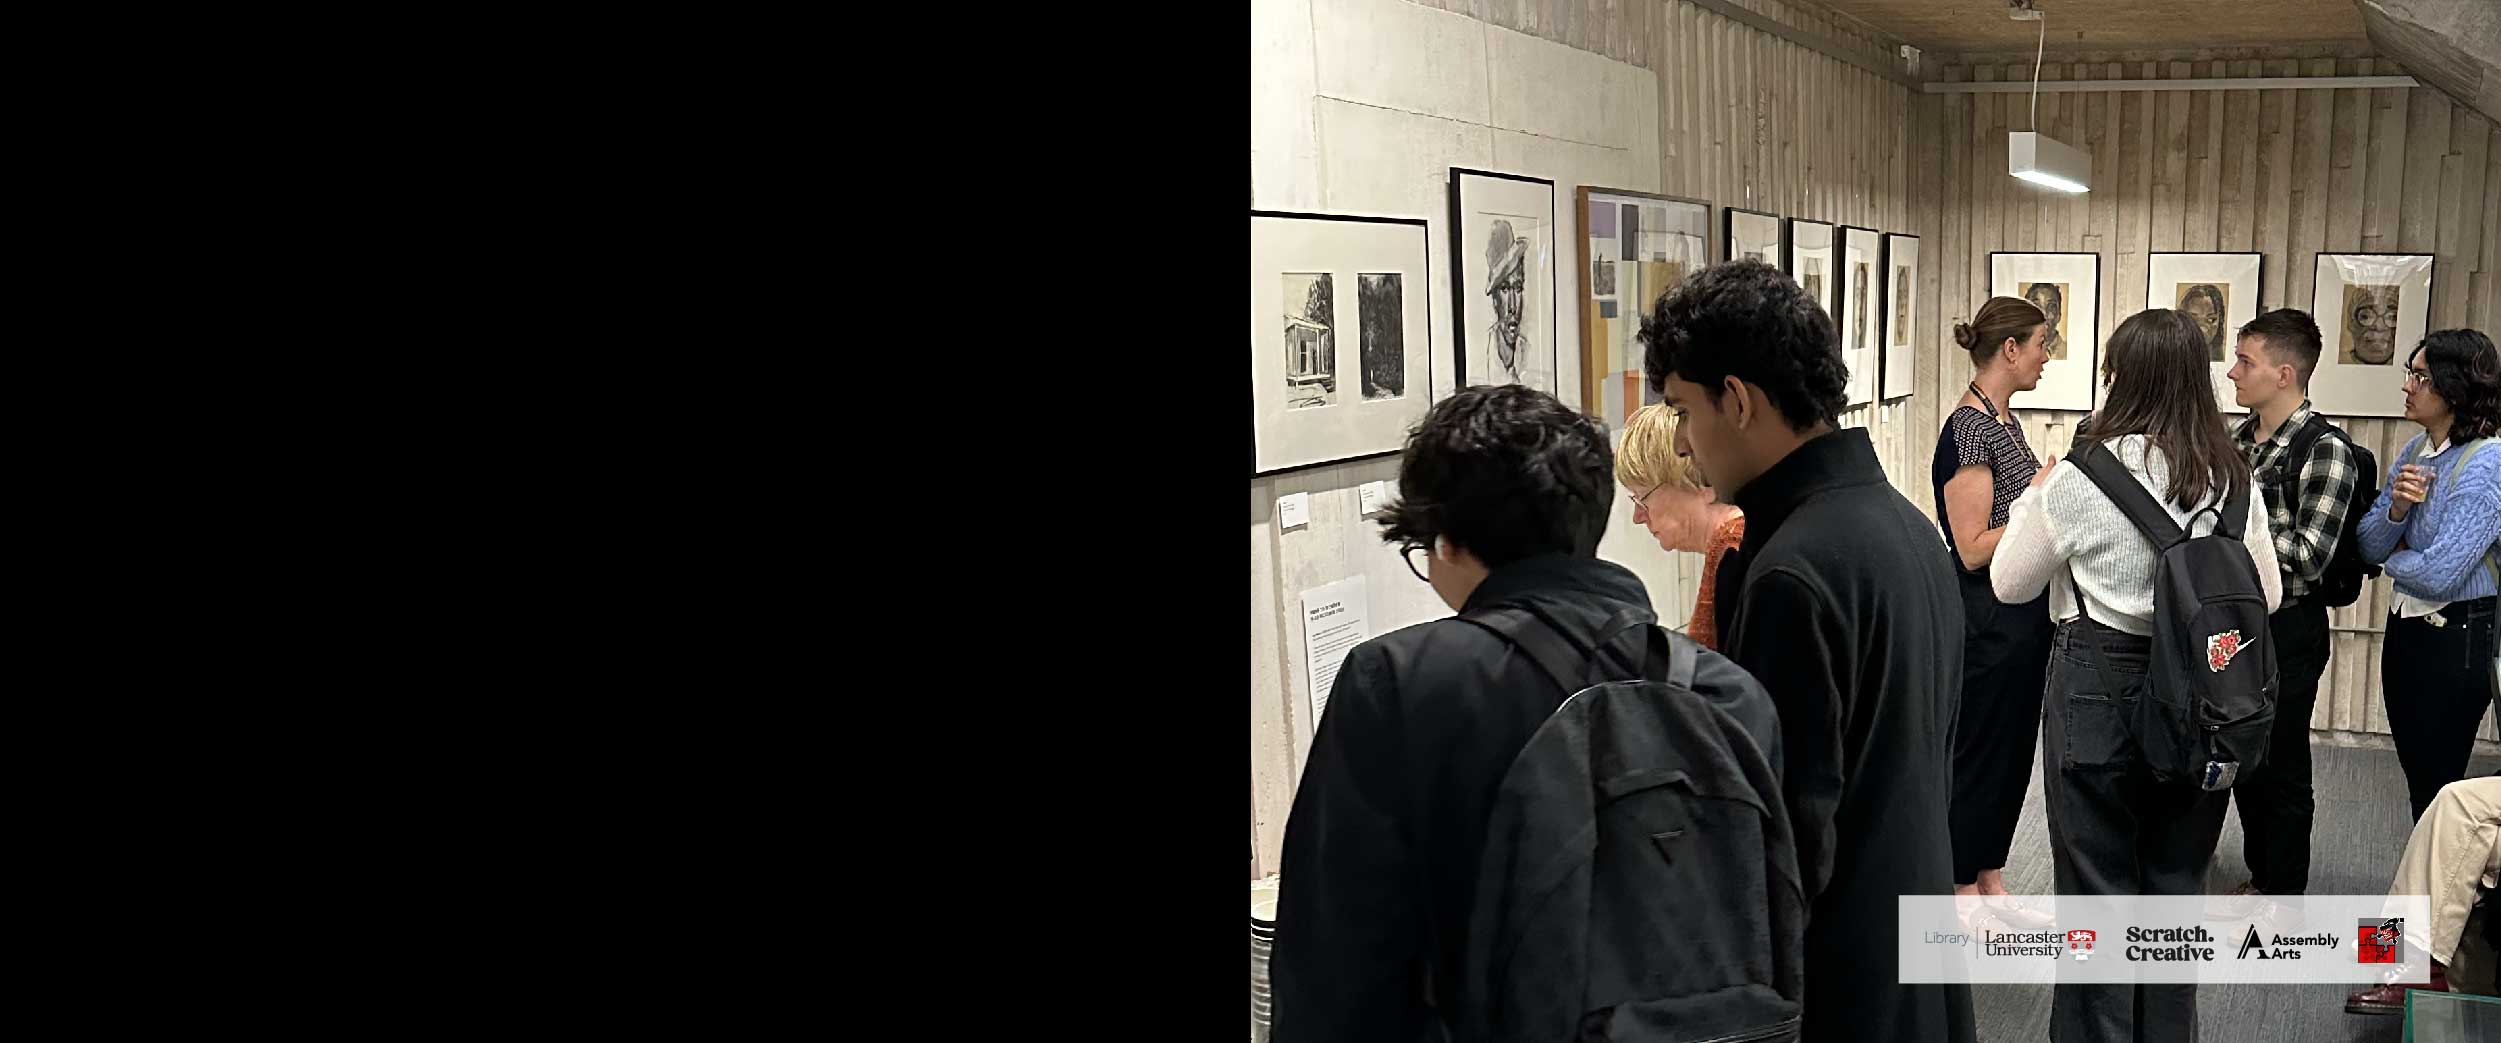 People viewing an exhibition of paintings in the library.